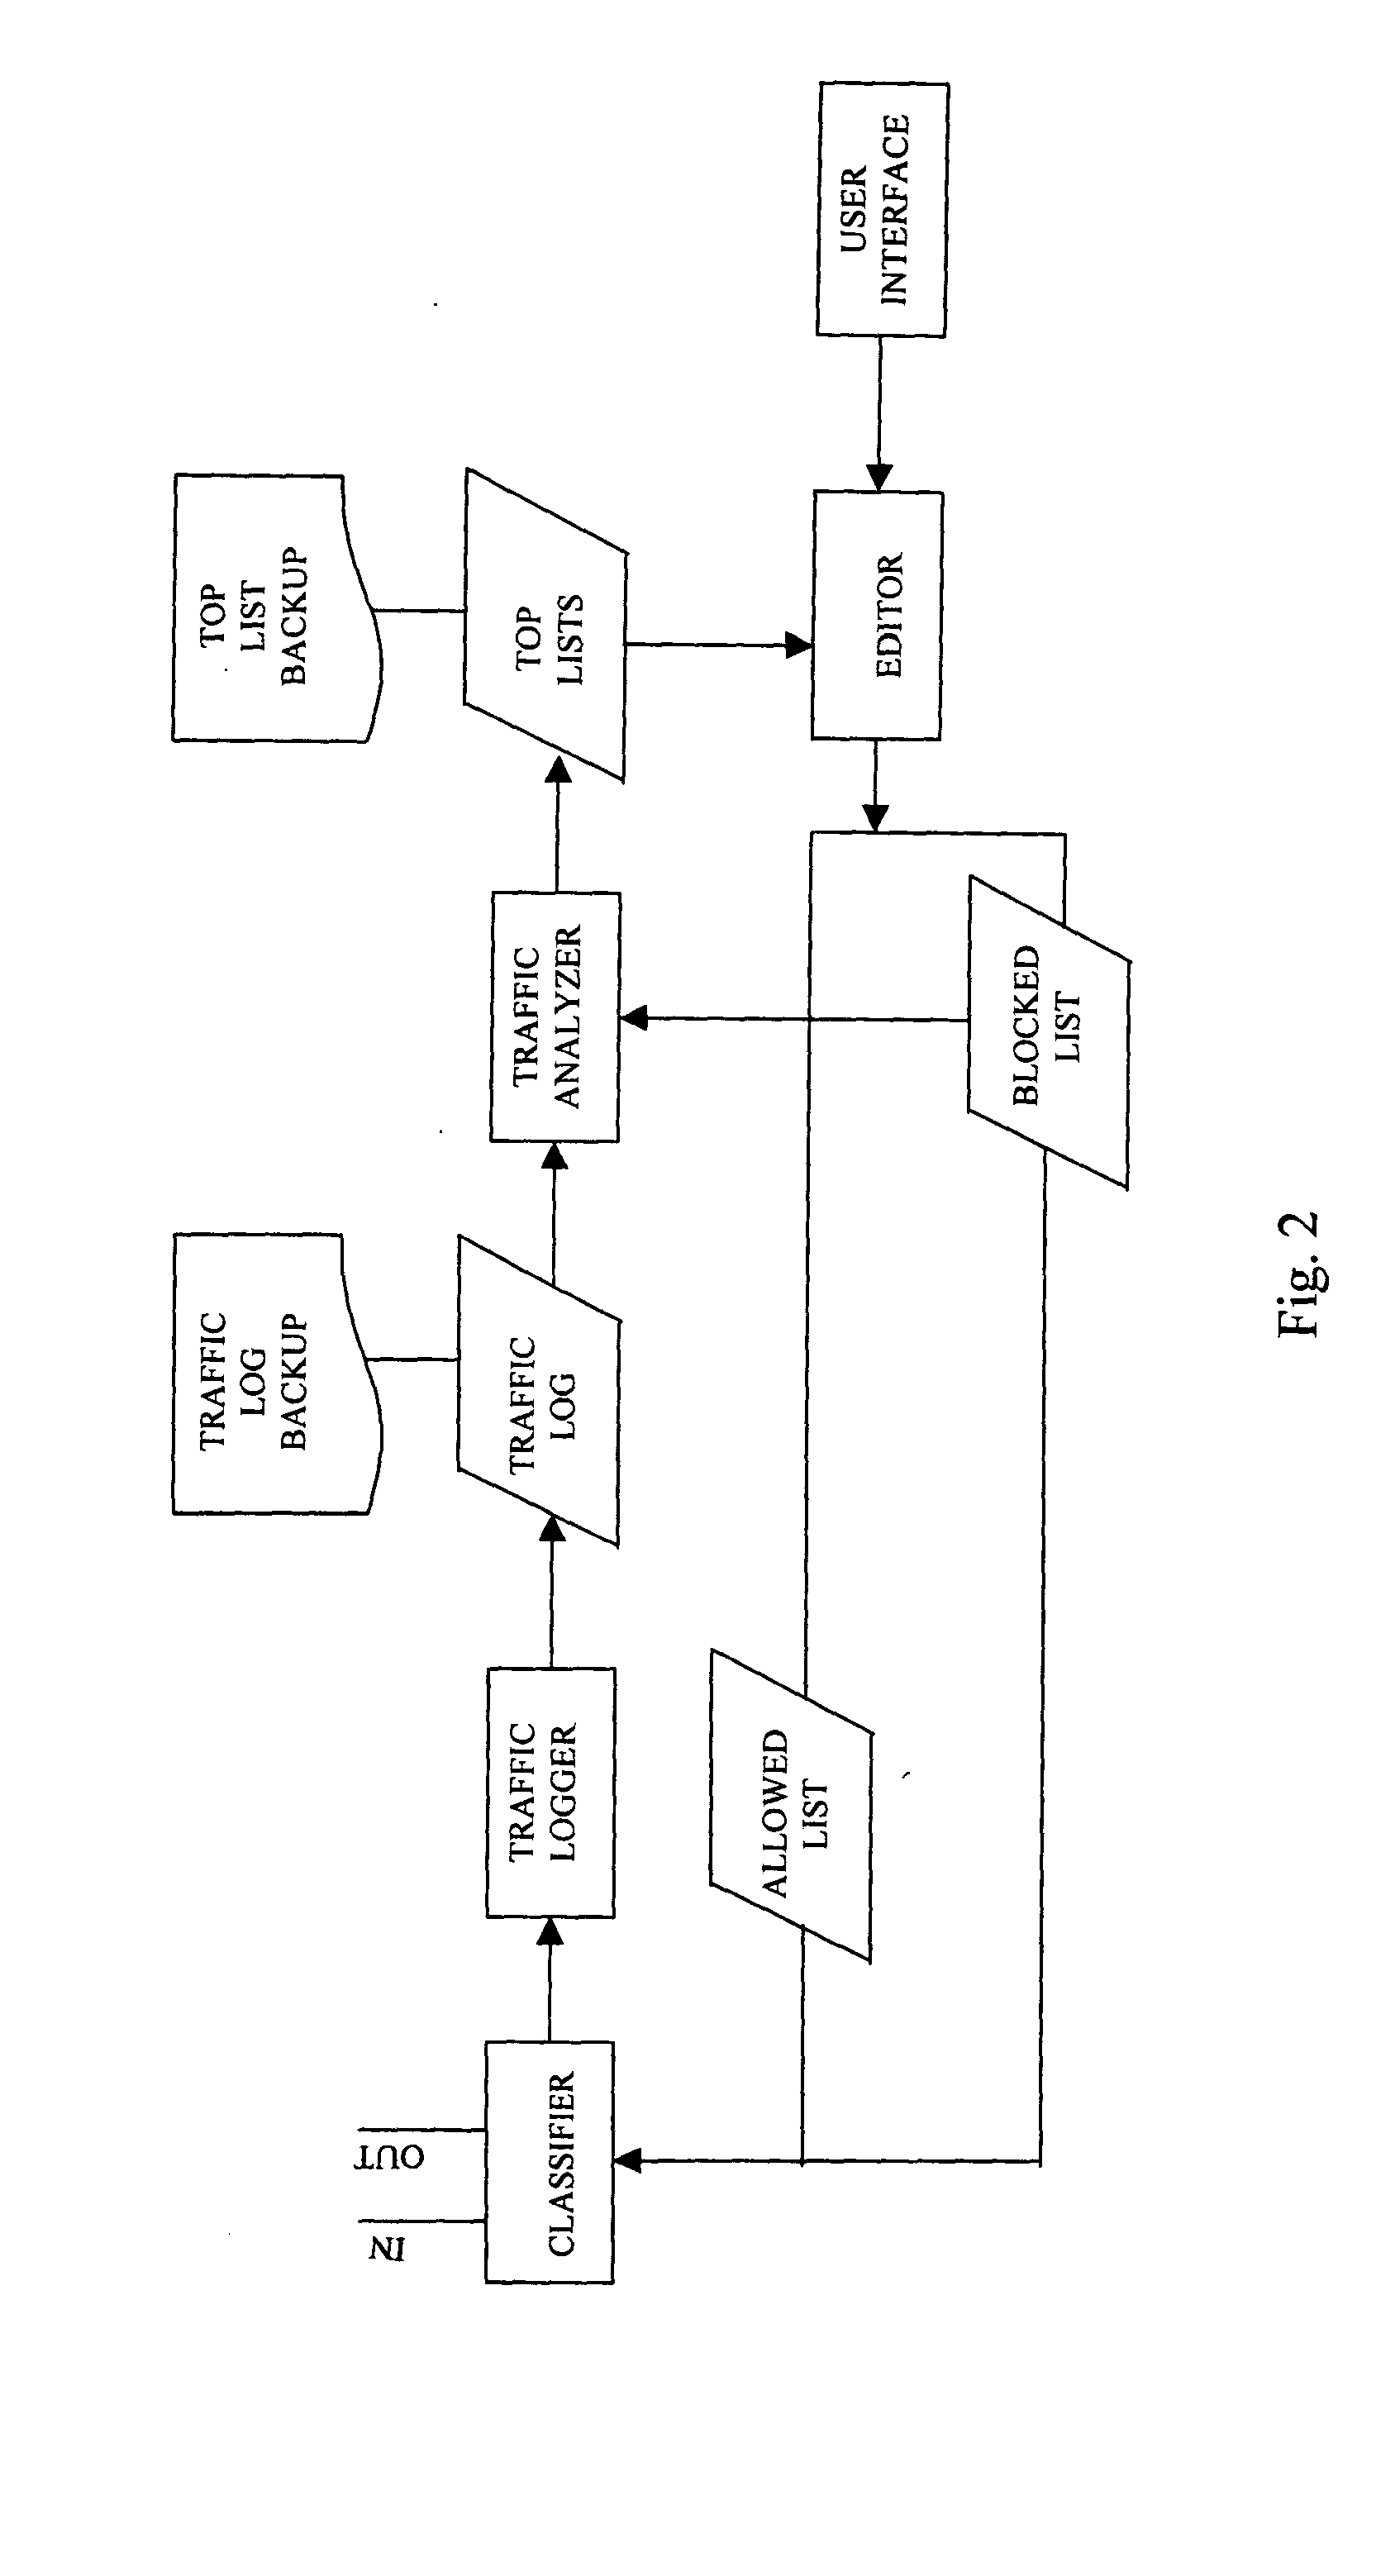 Method, system and computer program products for adaptive web-site access blocking